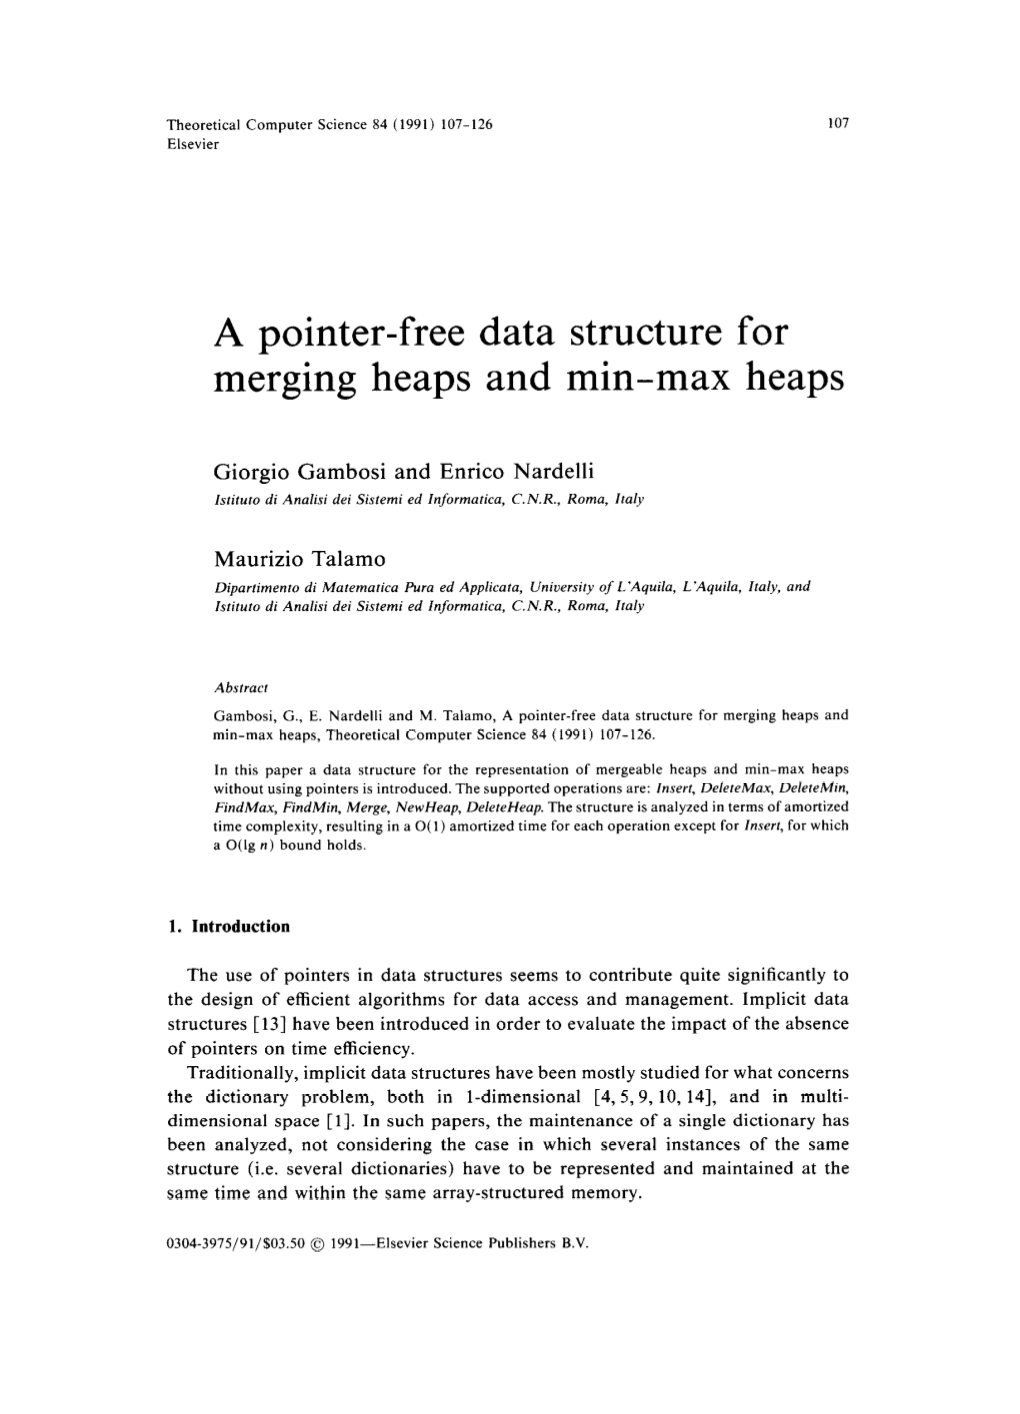 A Pointer-Free Data Structure for Merging Heaps and Min-Max Heaps